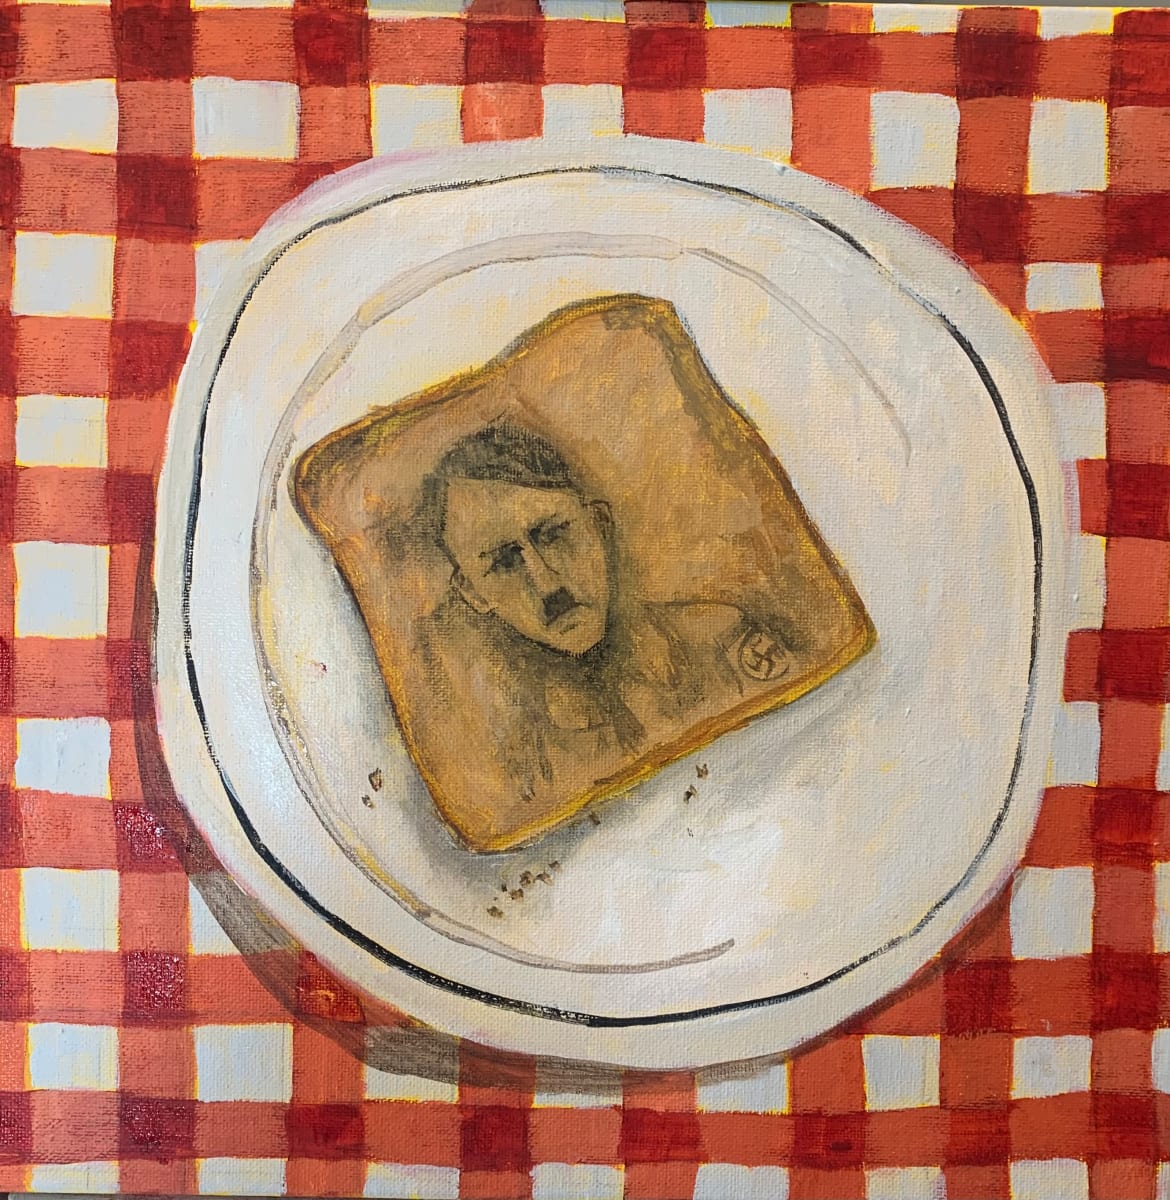 Hitler toast by Michael Bourke  Image: Although he still weeps tears over the holocaust and thoroughly disapproves of genocide, God often contemplates the idea of having Hitler’s face appear on a piece of toast - just as a bit of a joke.